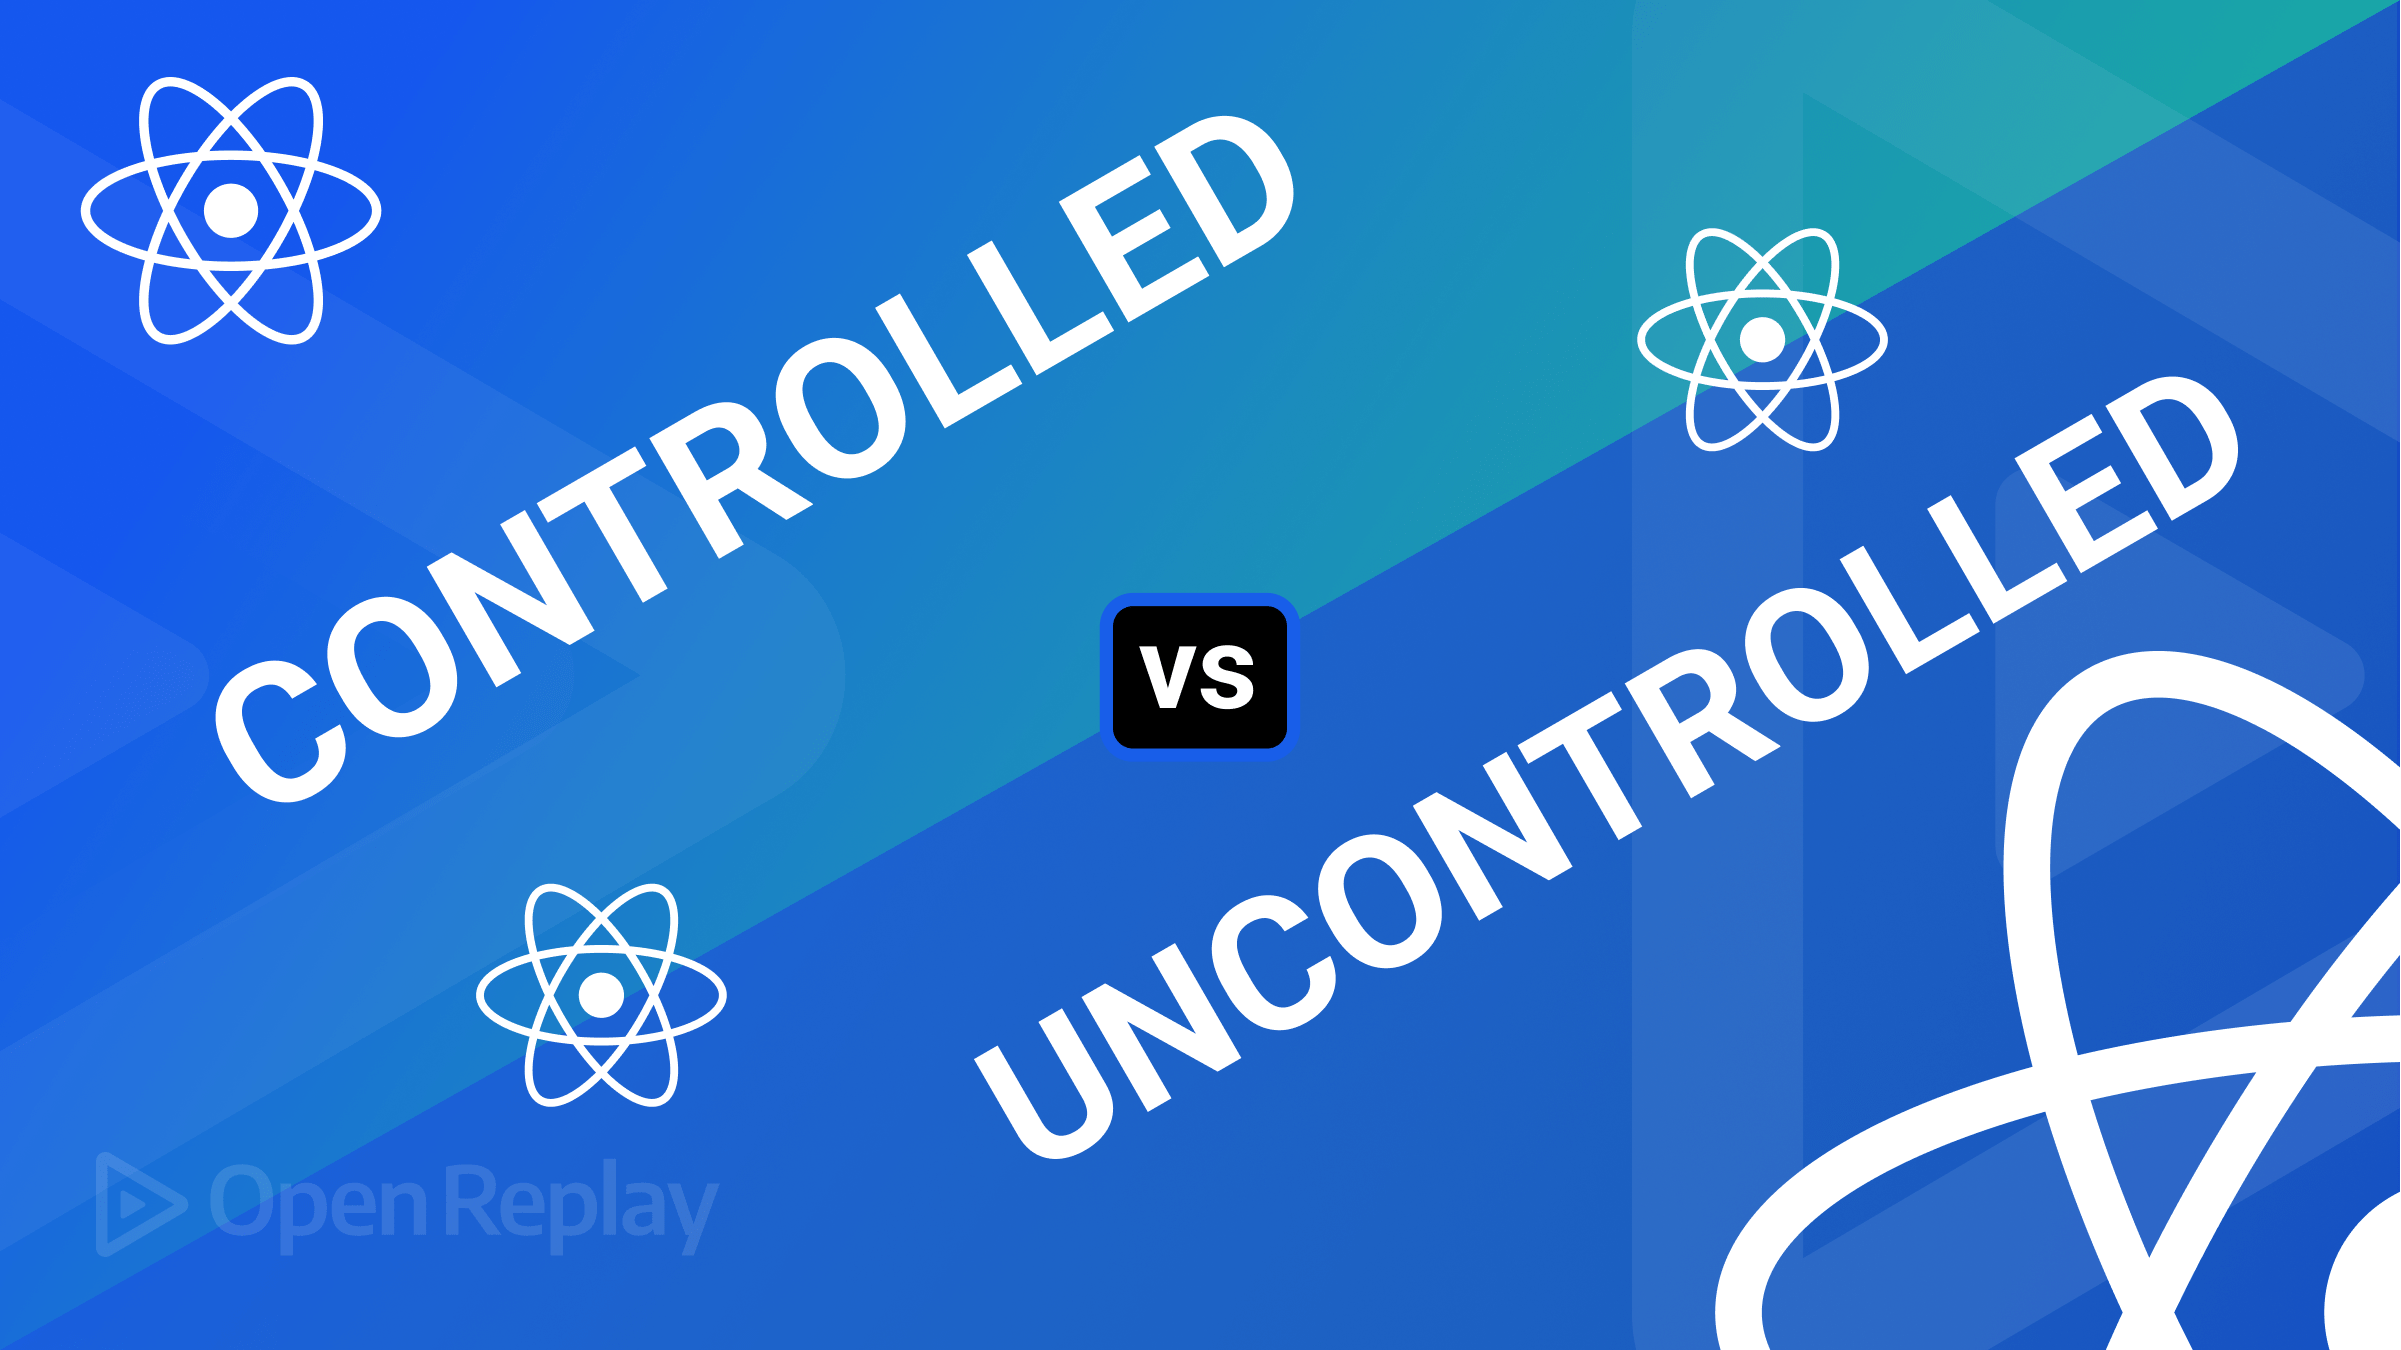 Understanding Controlled and Uncontrolled components in React